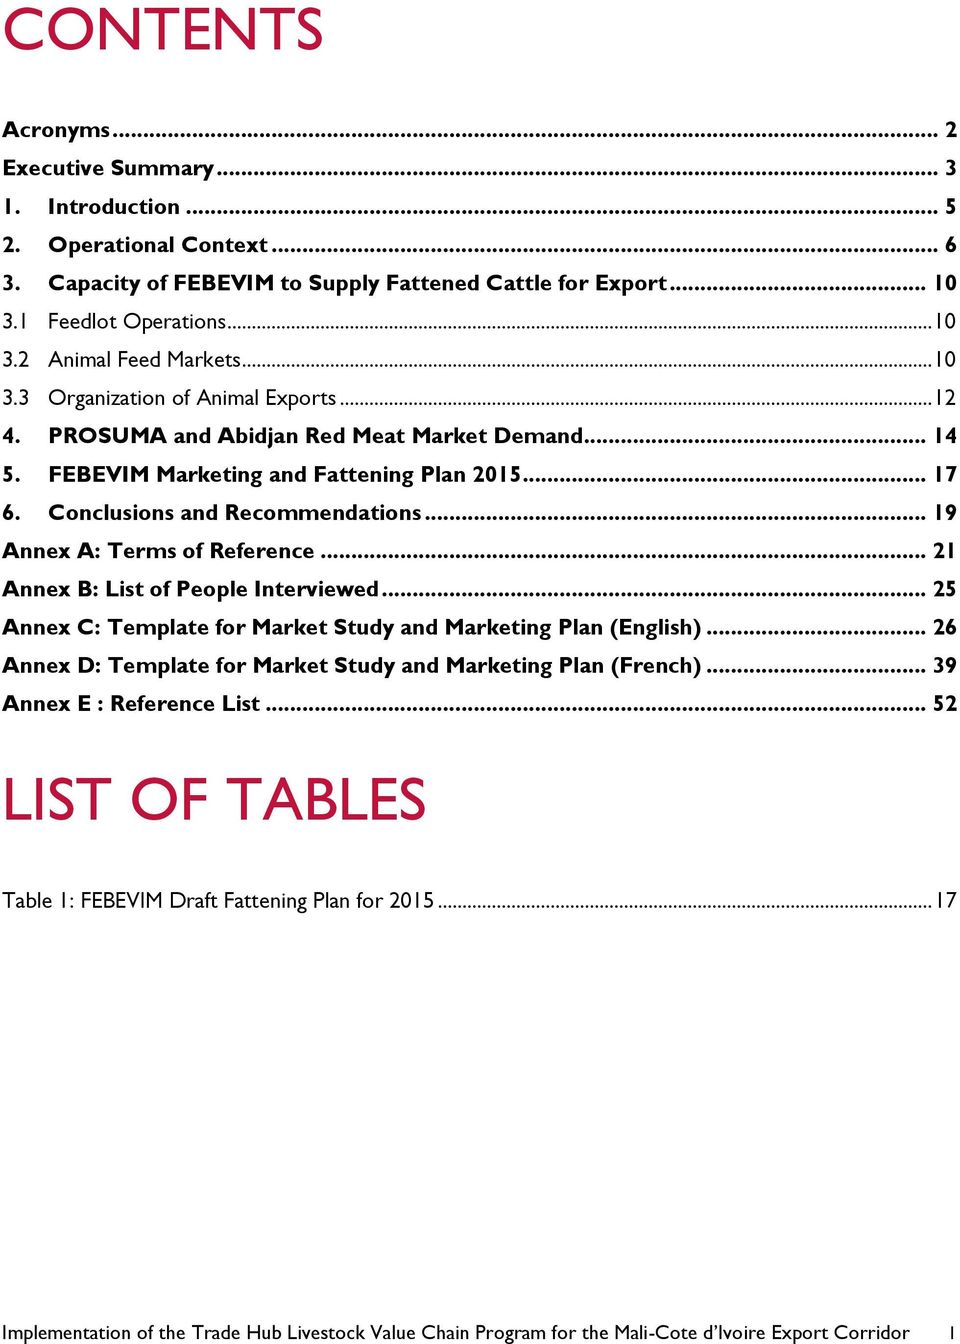 .. 19 Annex A: Terms of Reference... 21 Annex B: List of People Interviewed... 25 Annex C: Template for Market Study and Marketing Plan (English).